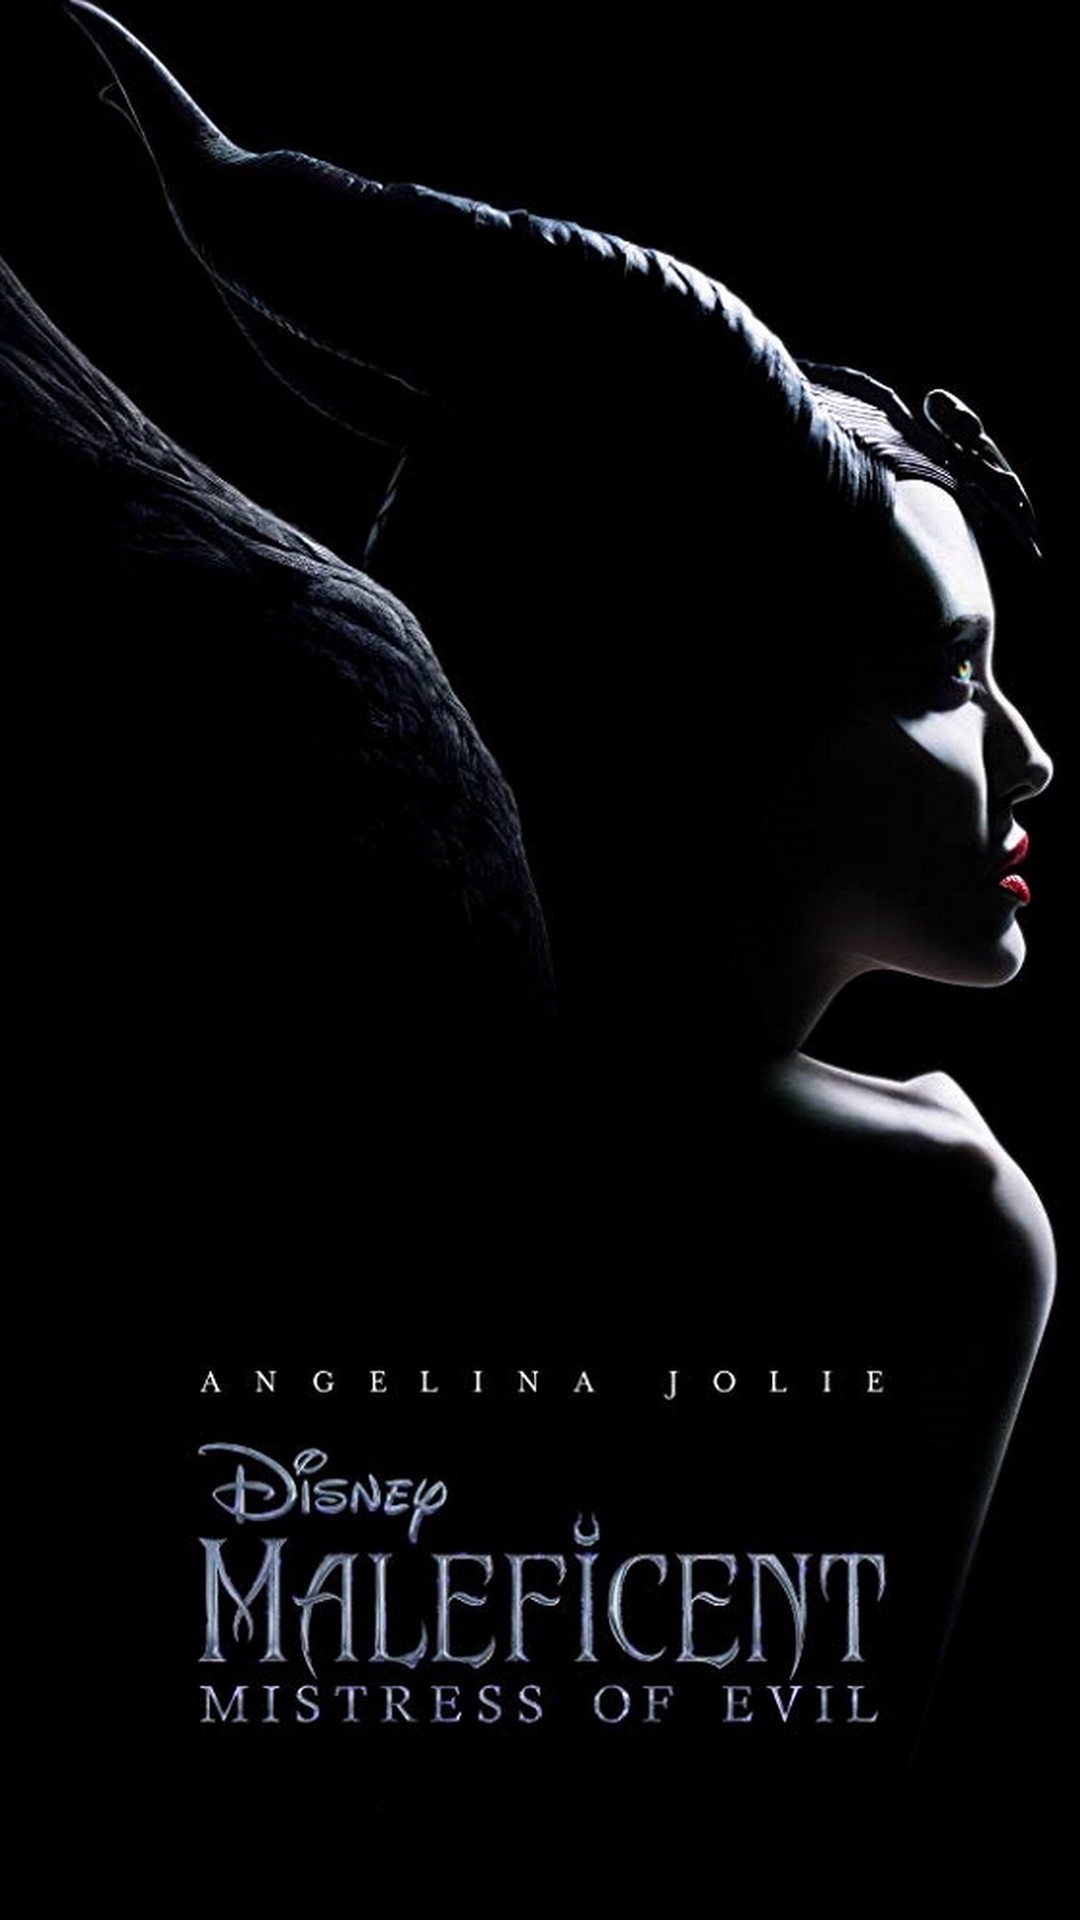 Android Wallpaper Maleficent Mistress of Evil with high-resolution 1080x1920 pixel. You can use this wallpaper for your Android backgrounds, Tablet, Samsung Screensavers, Mobile Phone Lock Screen and another Smartphones device